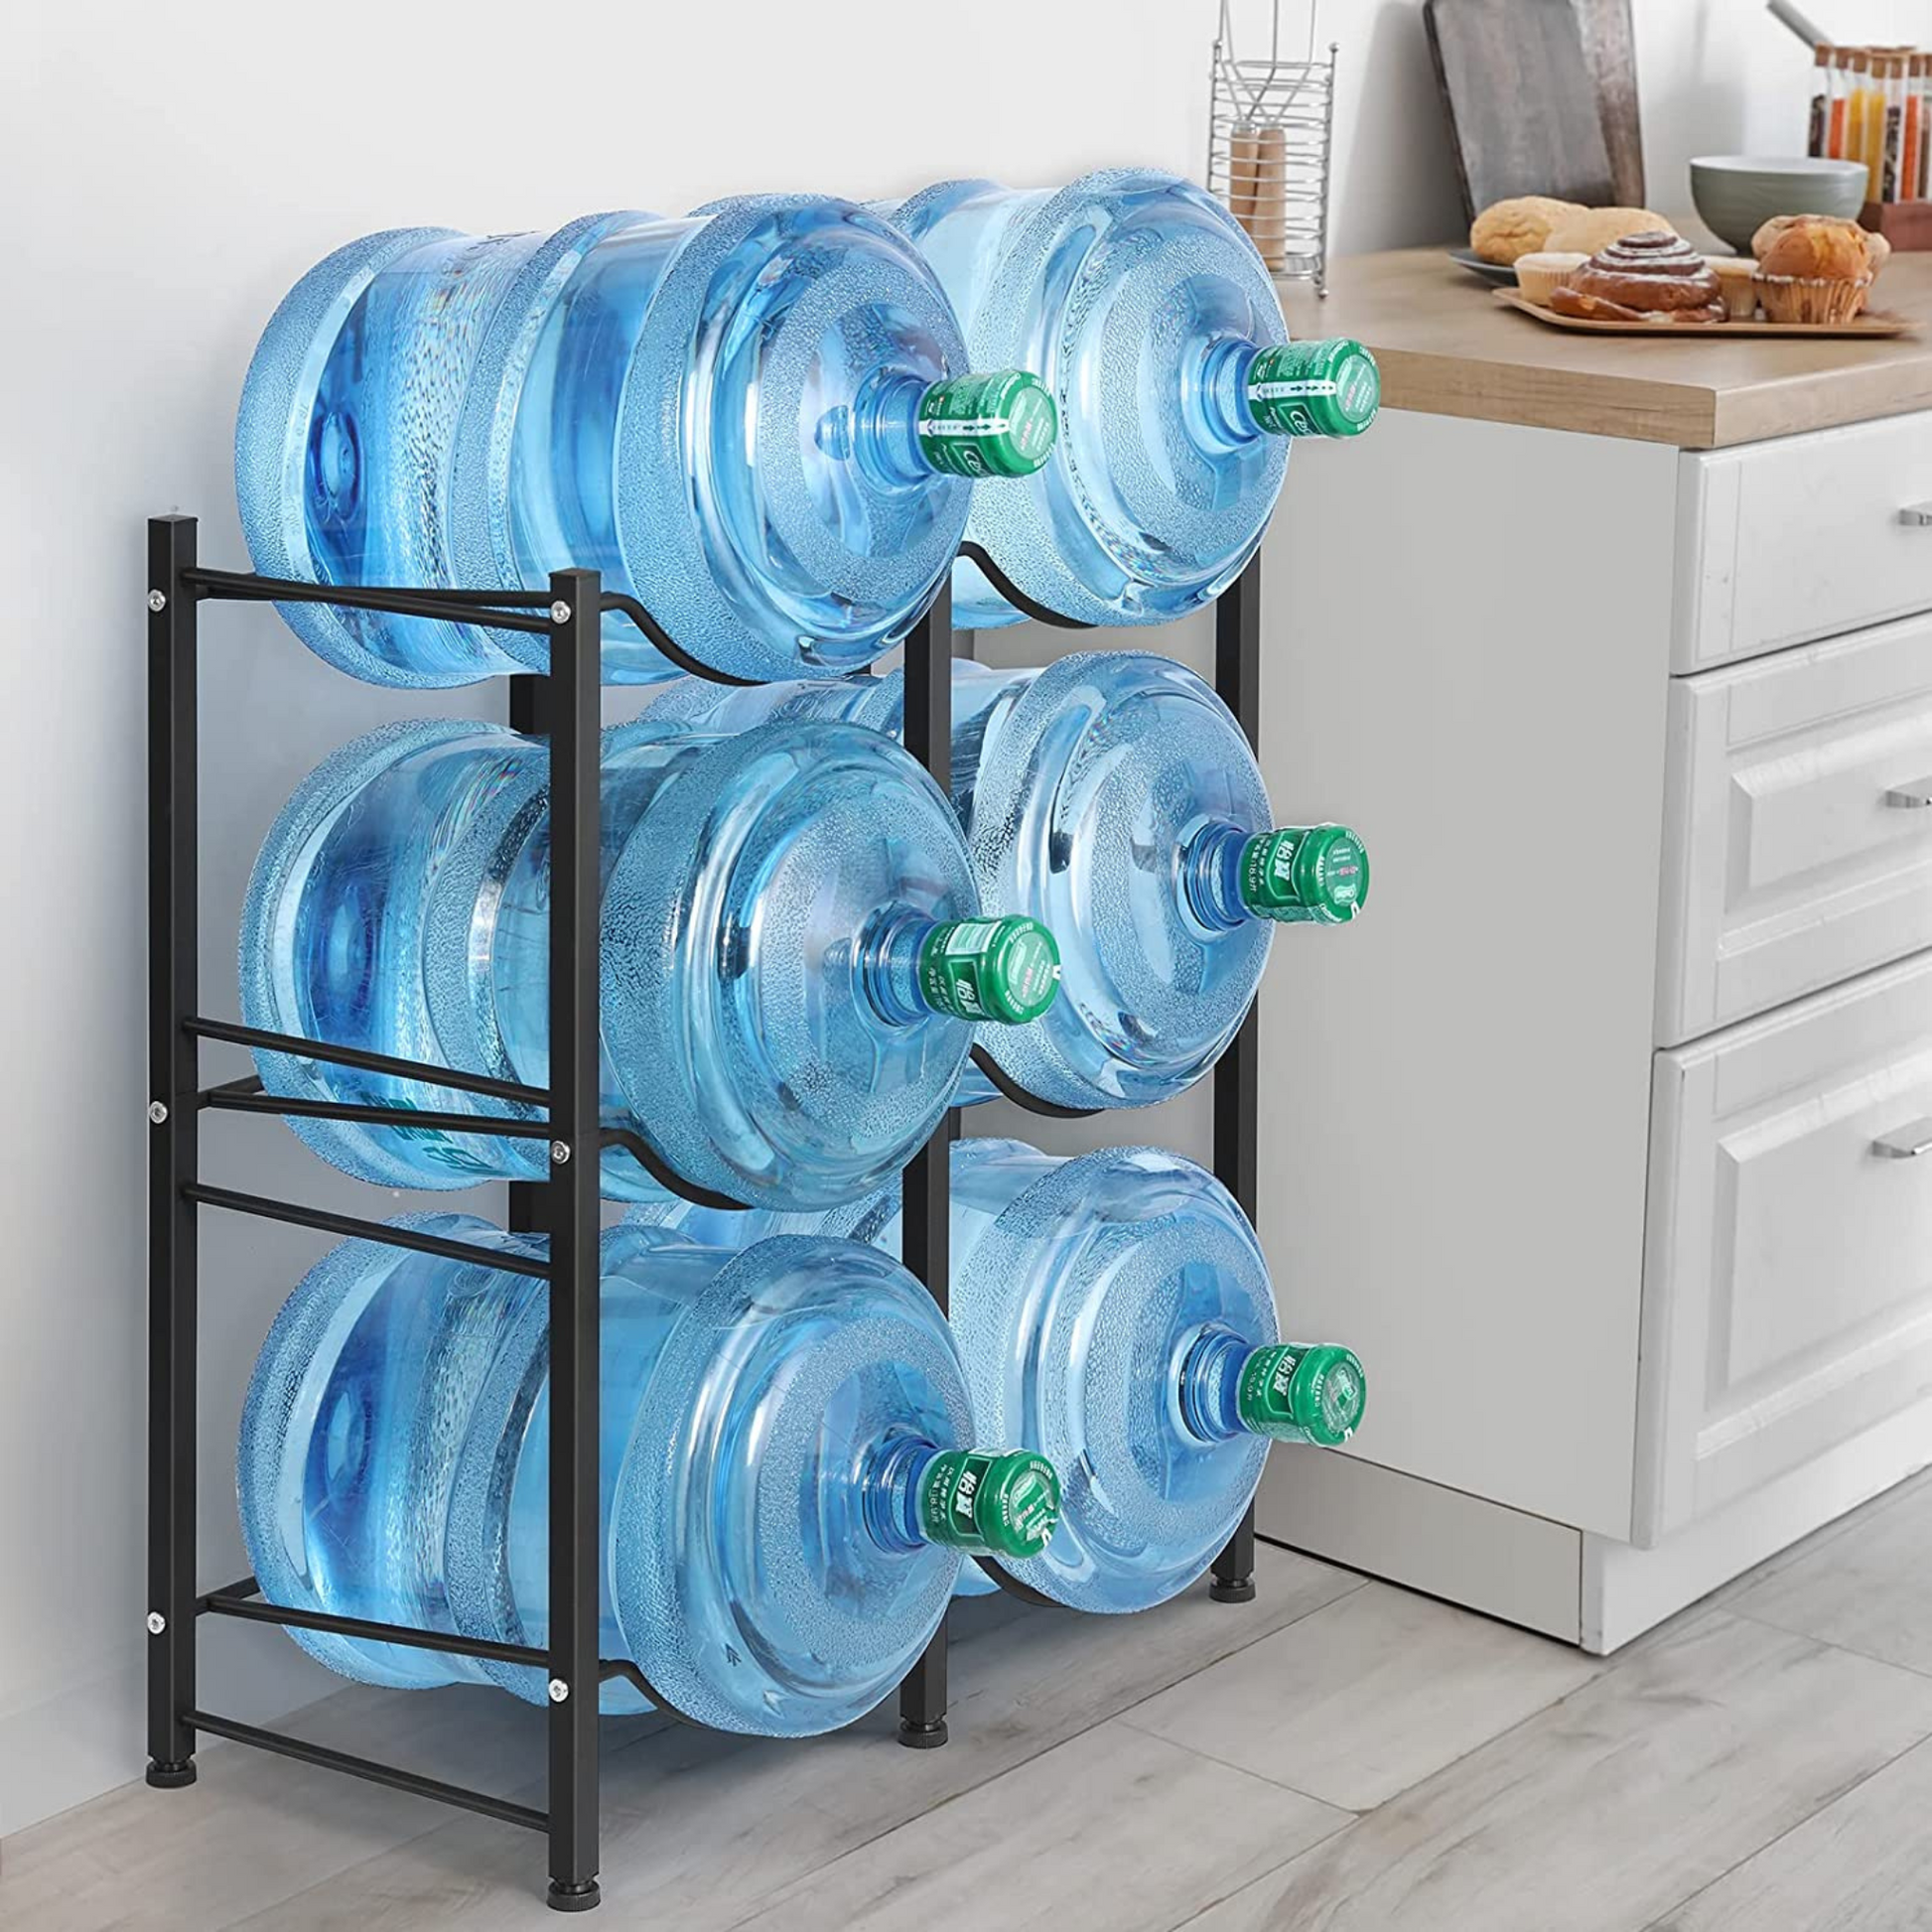 Maximize your space while keeping your water jugs organized with this 3-tier double 5-gallon water bottle rack. Made of durable steel with black paint, it measures 24.8” x 12.9” x 29.1” (LWH) and can hold up to 6 water gallon jugs at one time. Its adjustable screw feet provide stability and prevent floor damage.